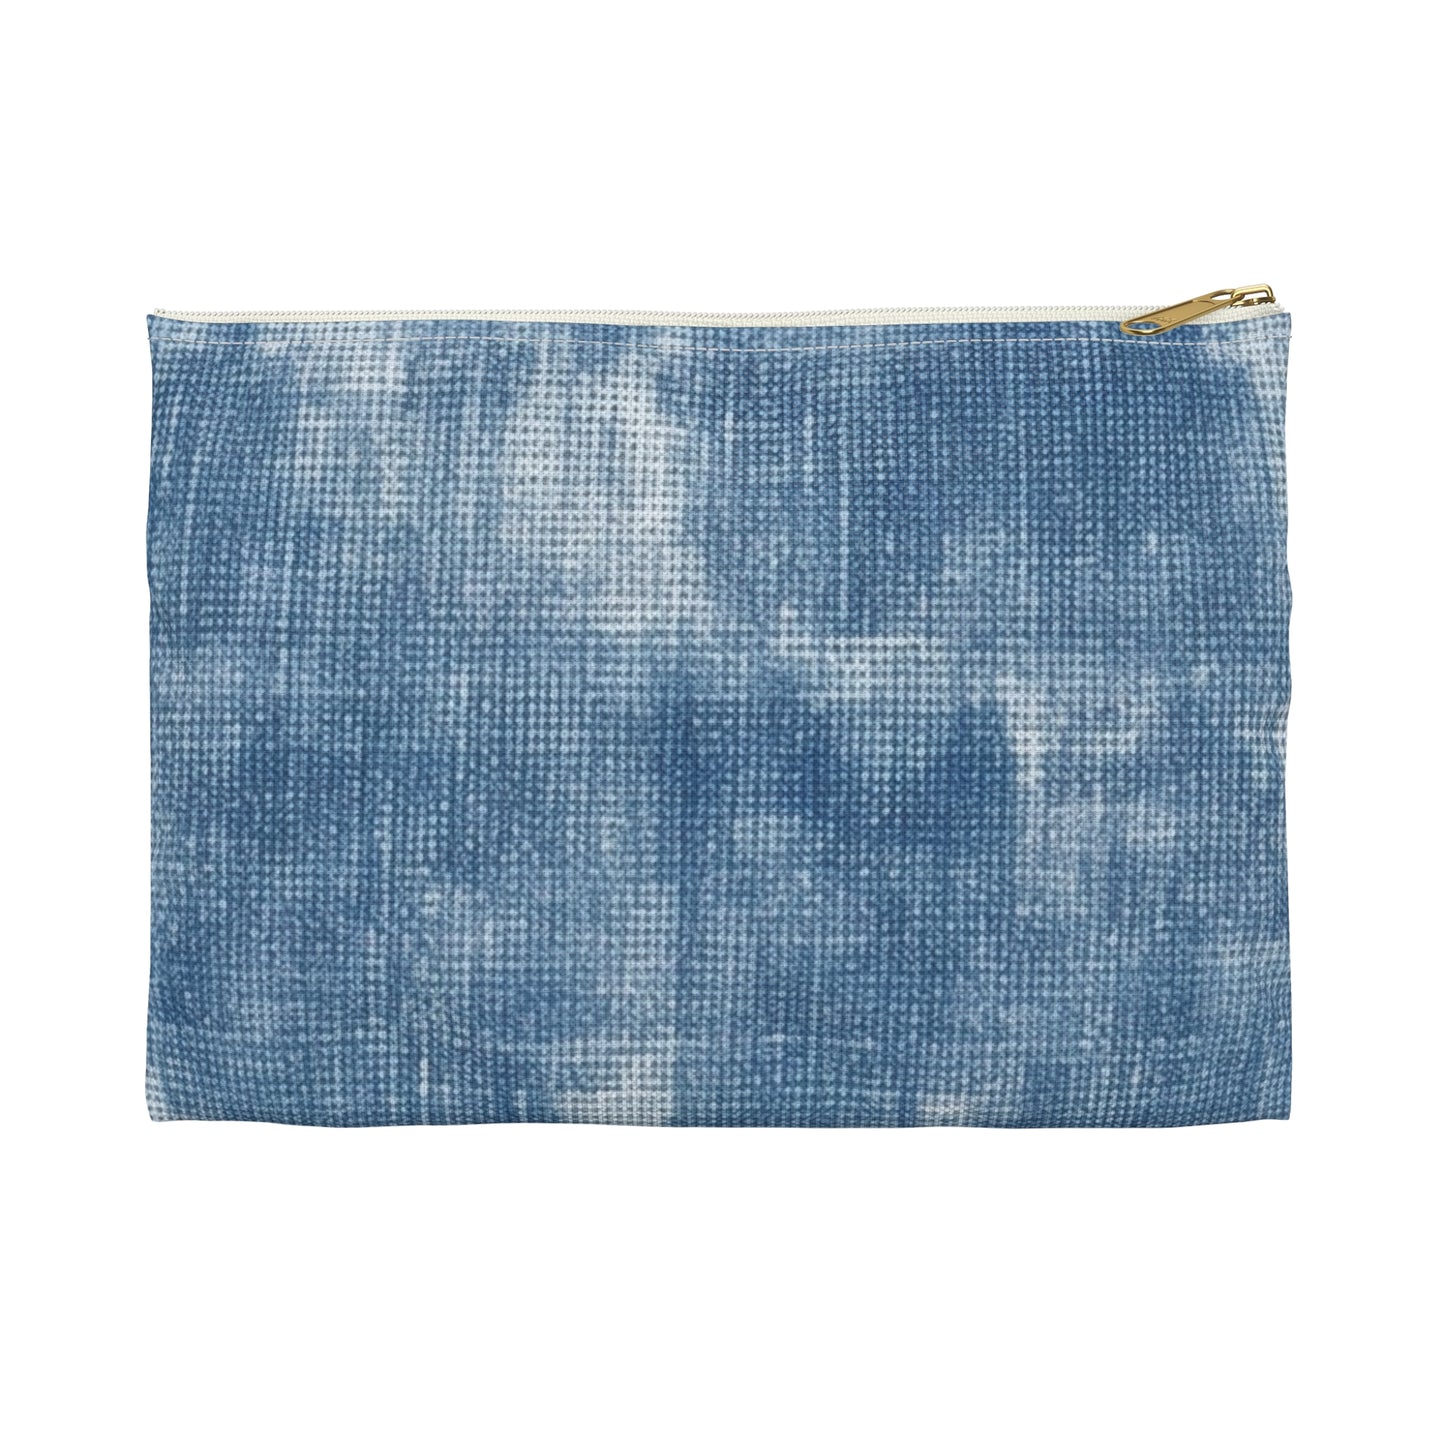 Faded Blue Washed-Out: Denim-Inspired, Style Fabric - Accessory Pouch